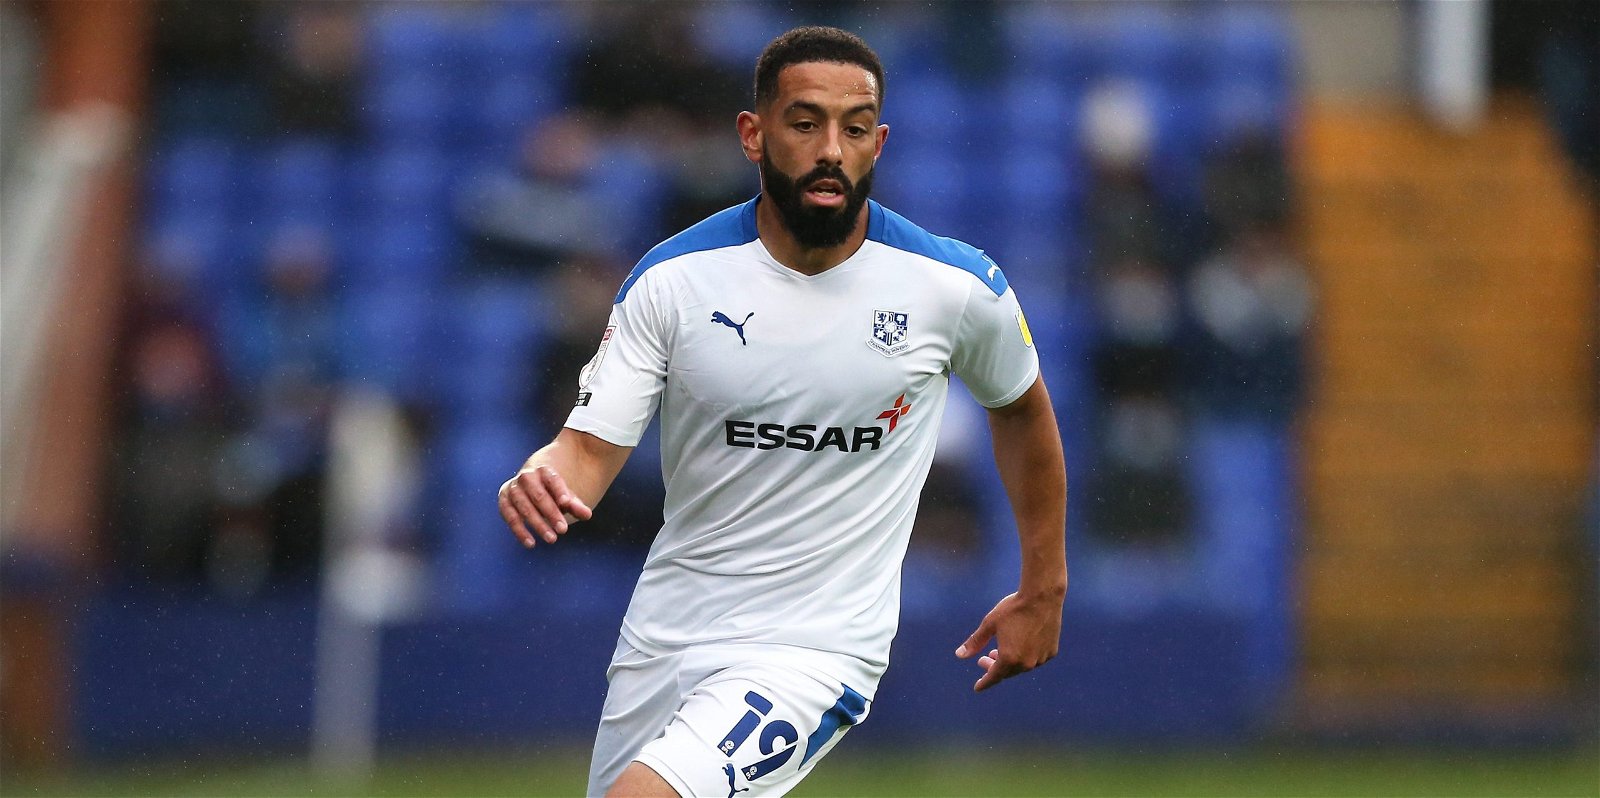 , Tranmere Rovers snap up Liam Feeney from Blackpool on permanent deal